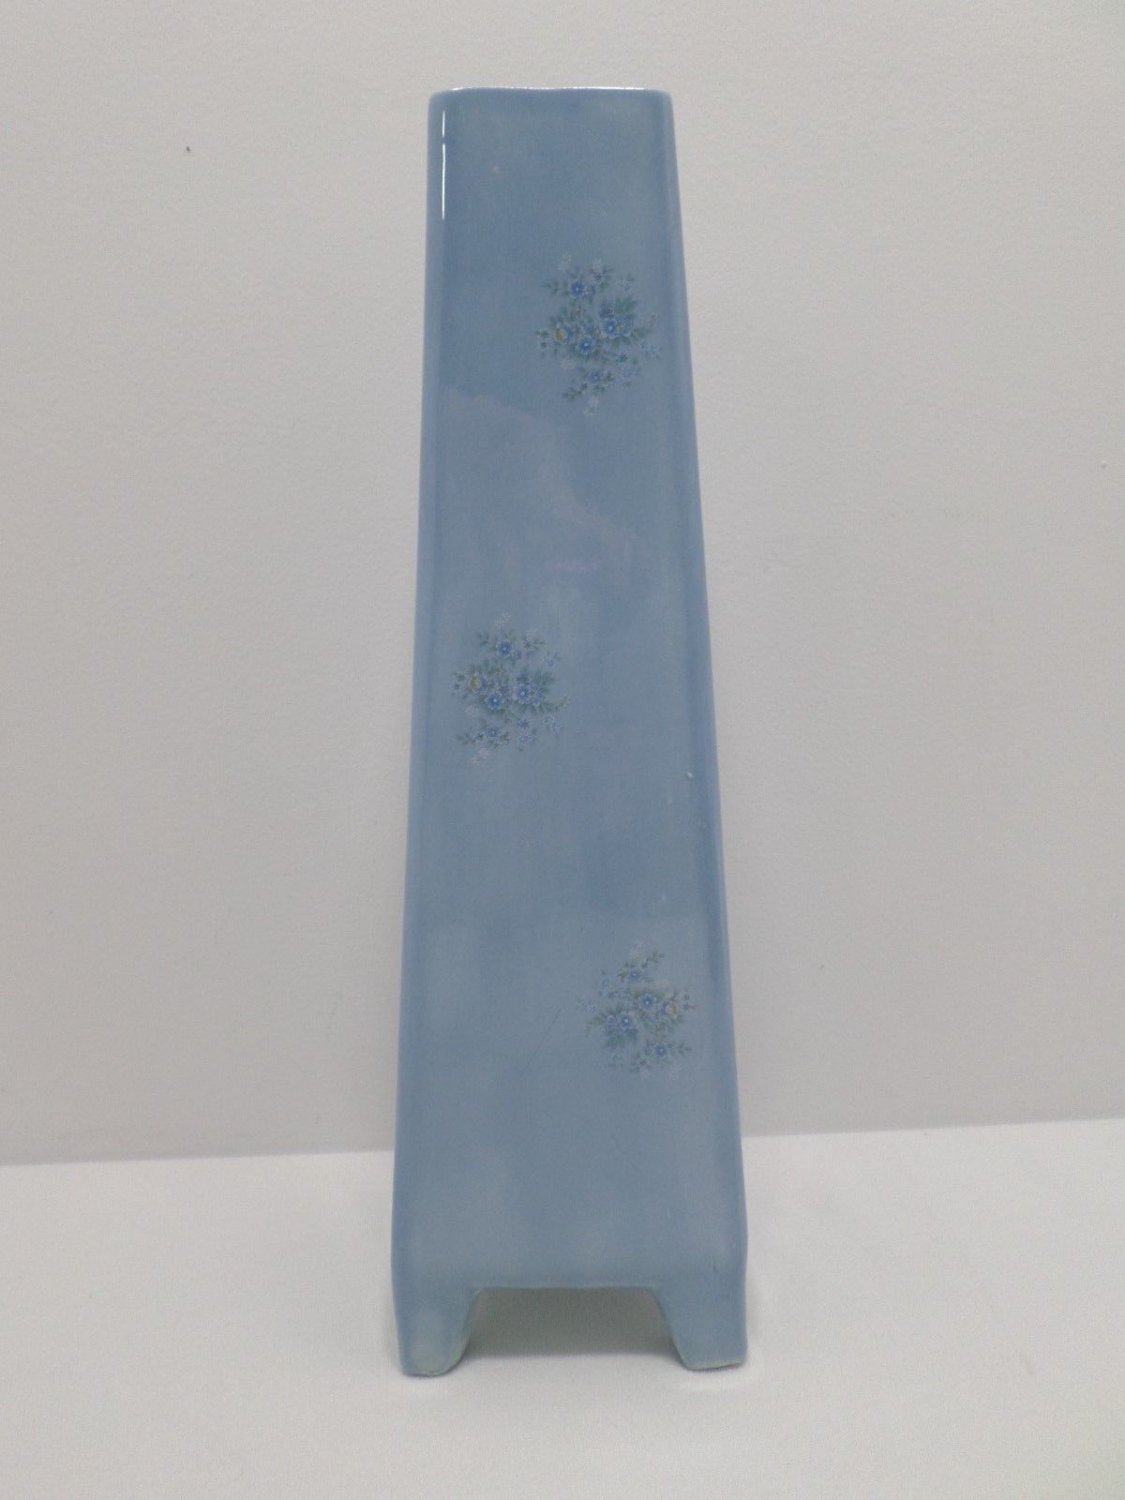 Flower Vase Blue Pottery Floral Designl Square with Legs Very Tall